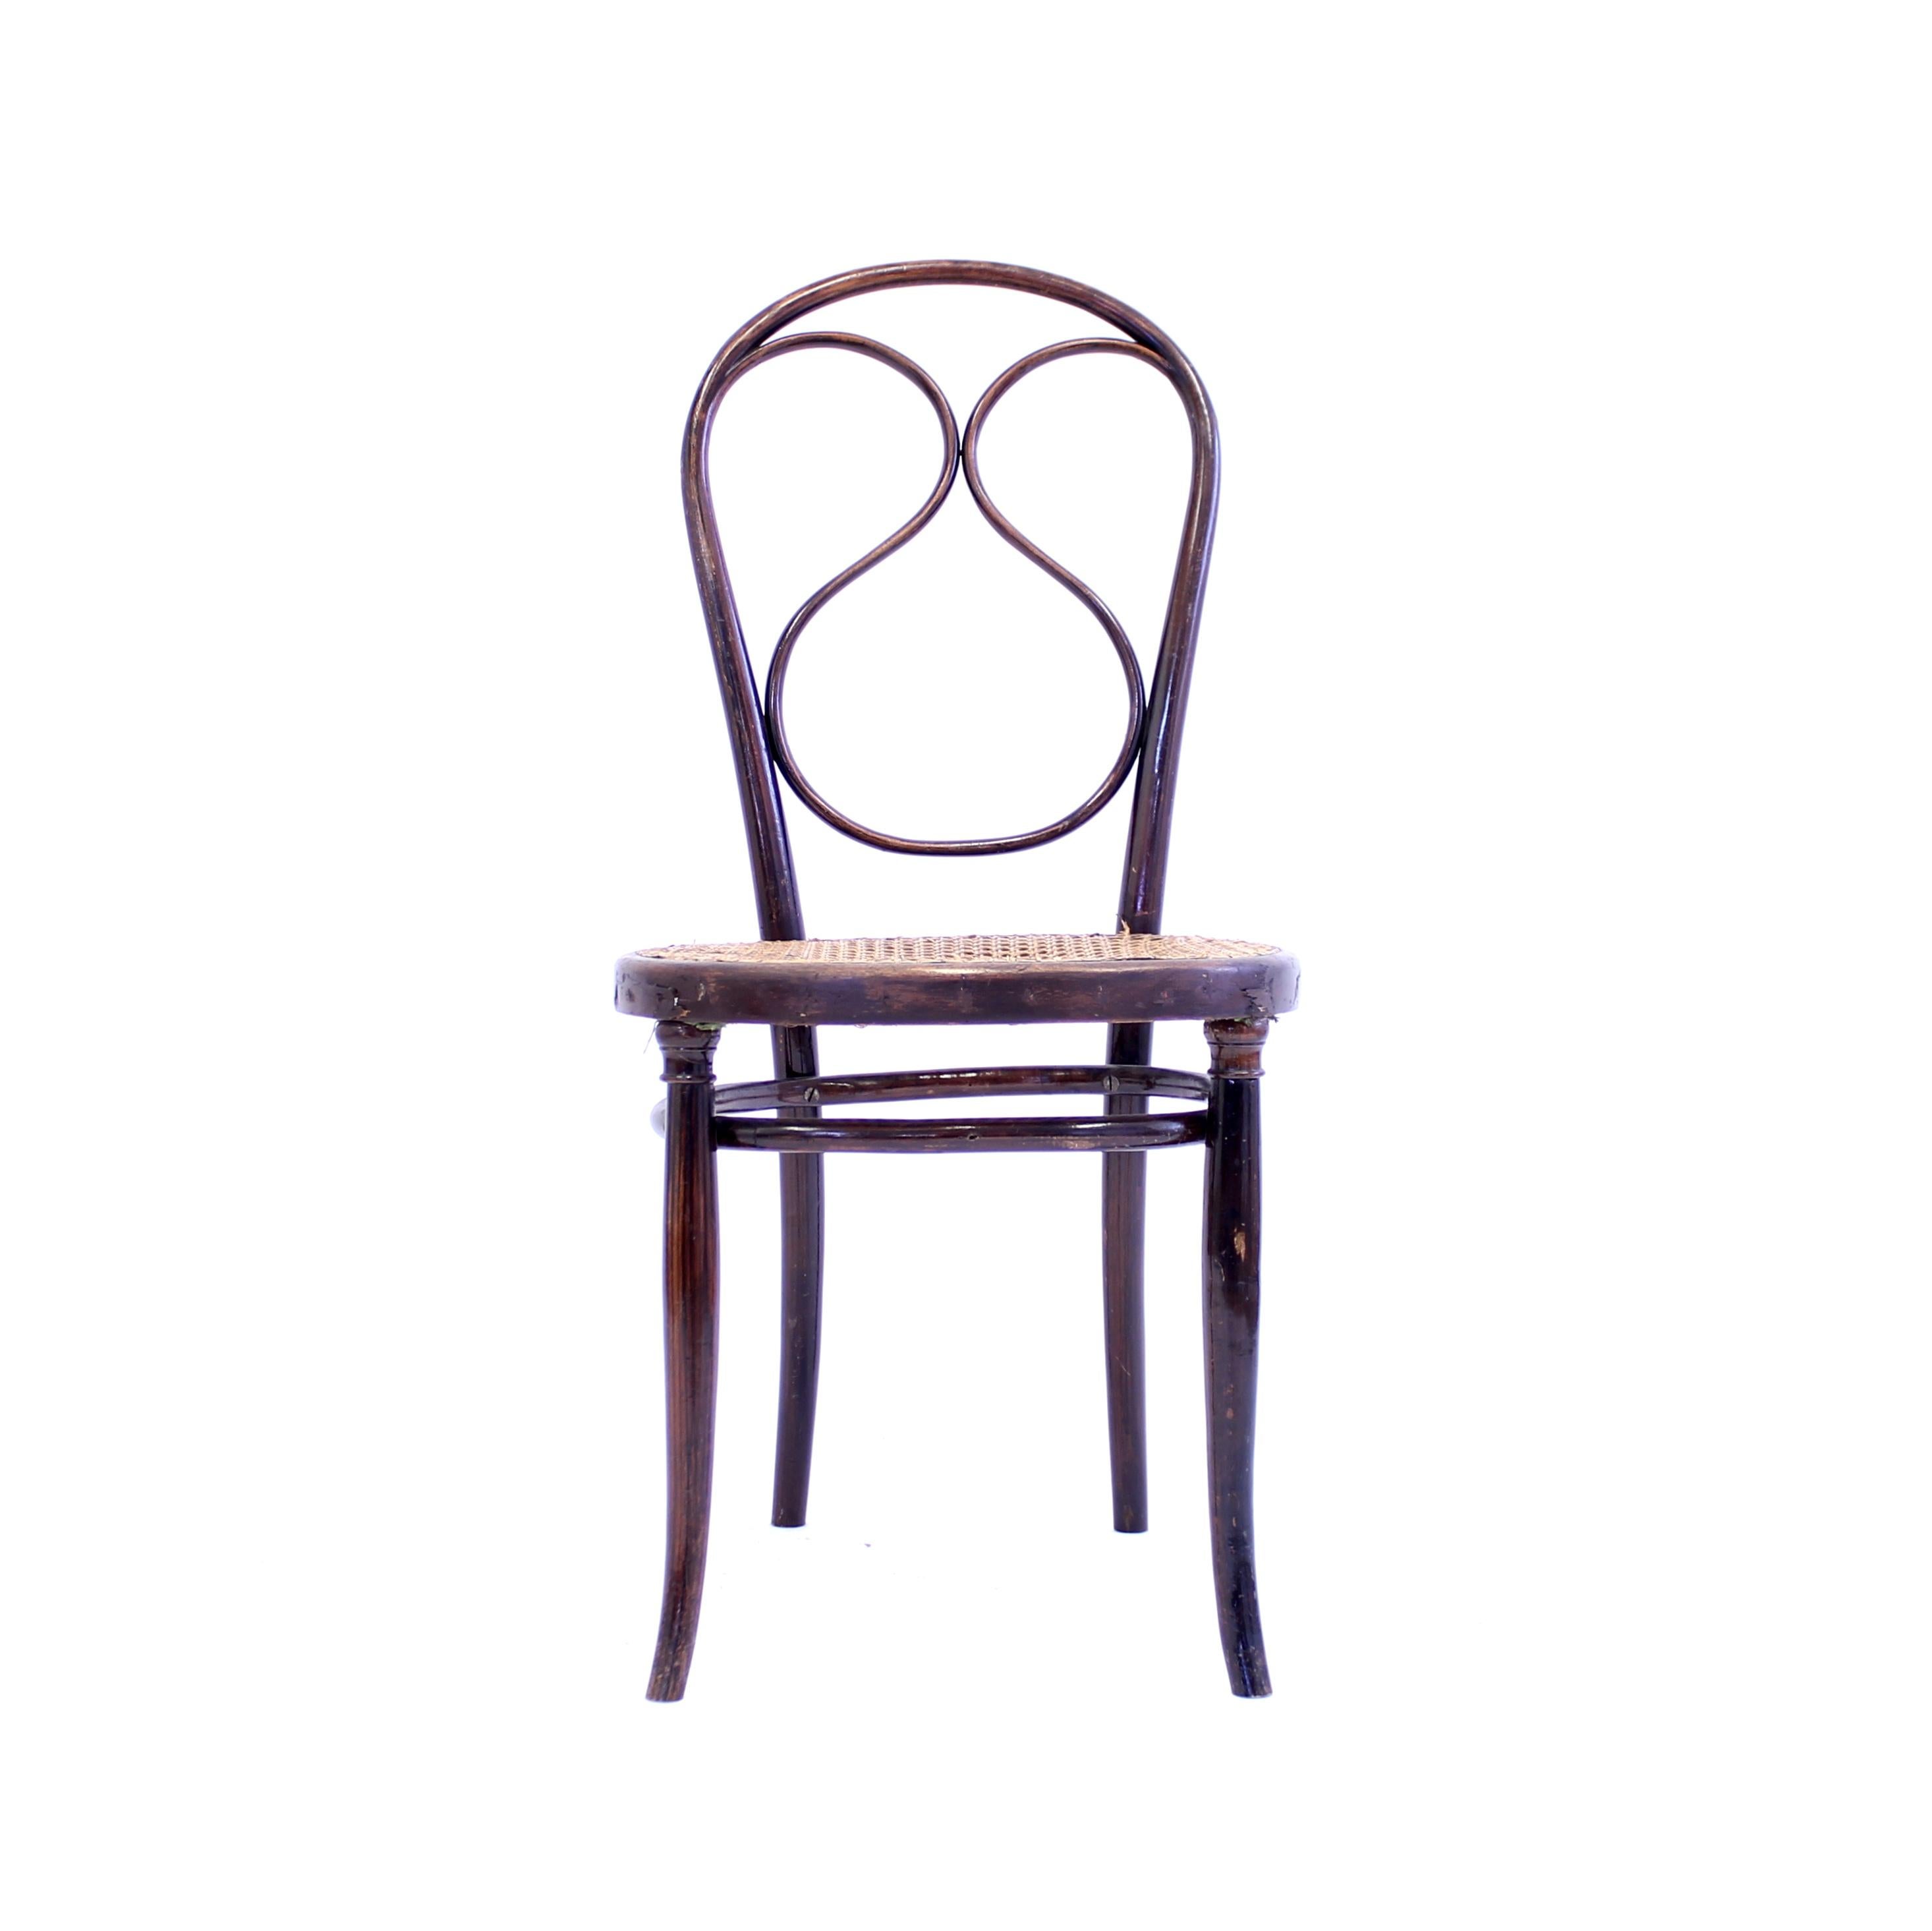 Stunning bentwood chair manufactured by Fischel around turn of the century 1900. Fischel was one of the larges producer of bentwood furniture alongside Thonet and J&J Kohn. The backrest in particular is a piece of art in itself with the central,